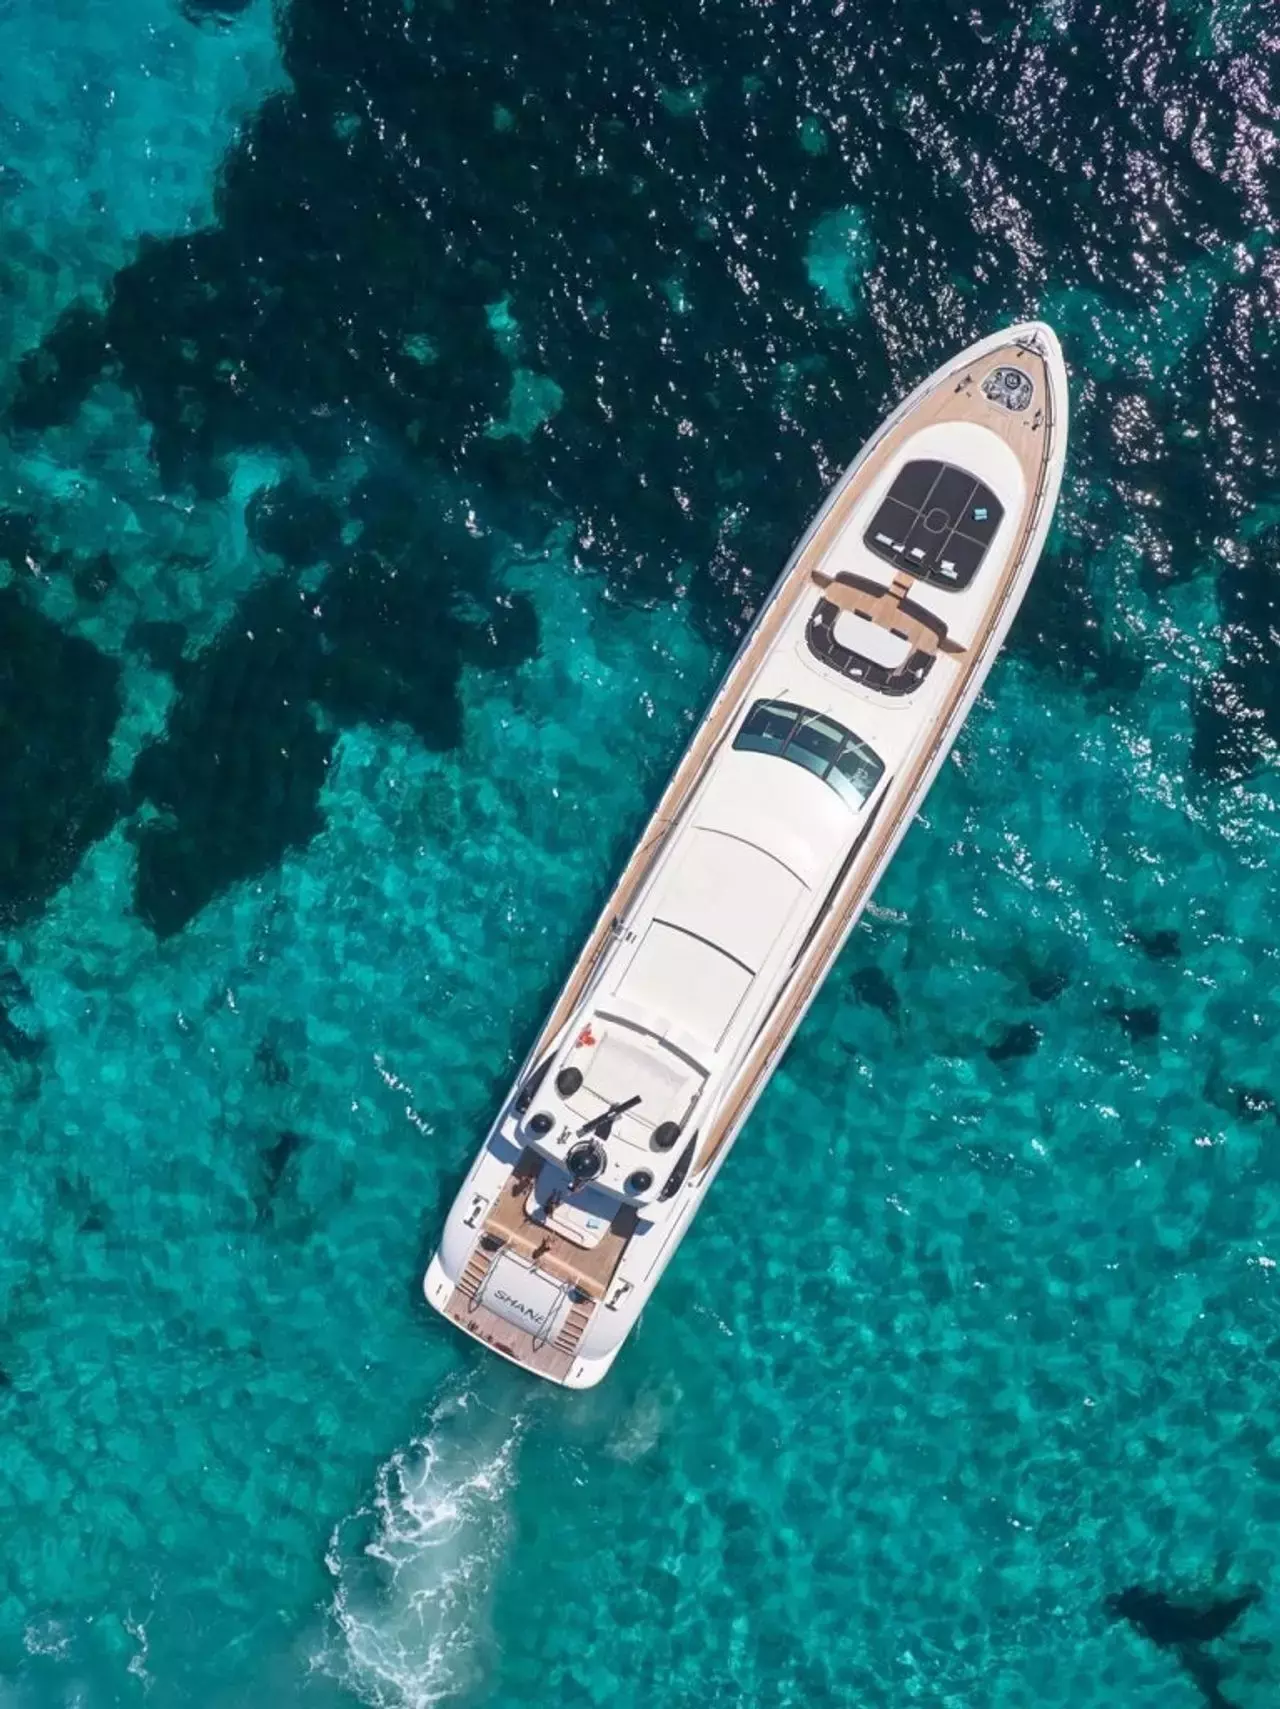 Shane by Mangusta - Special Offer for a private Superyacht Charter in Mallorca with a crew